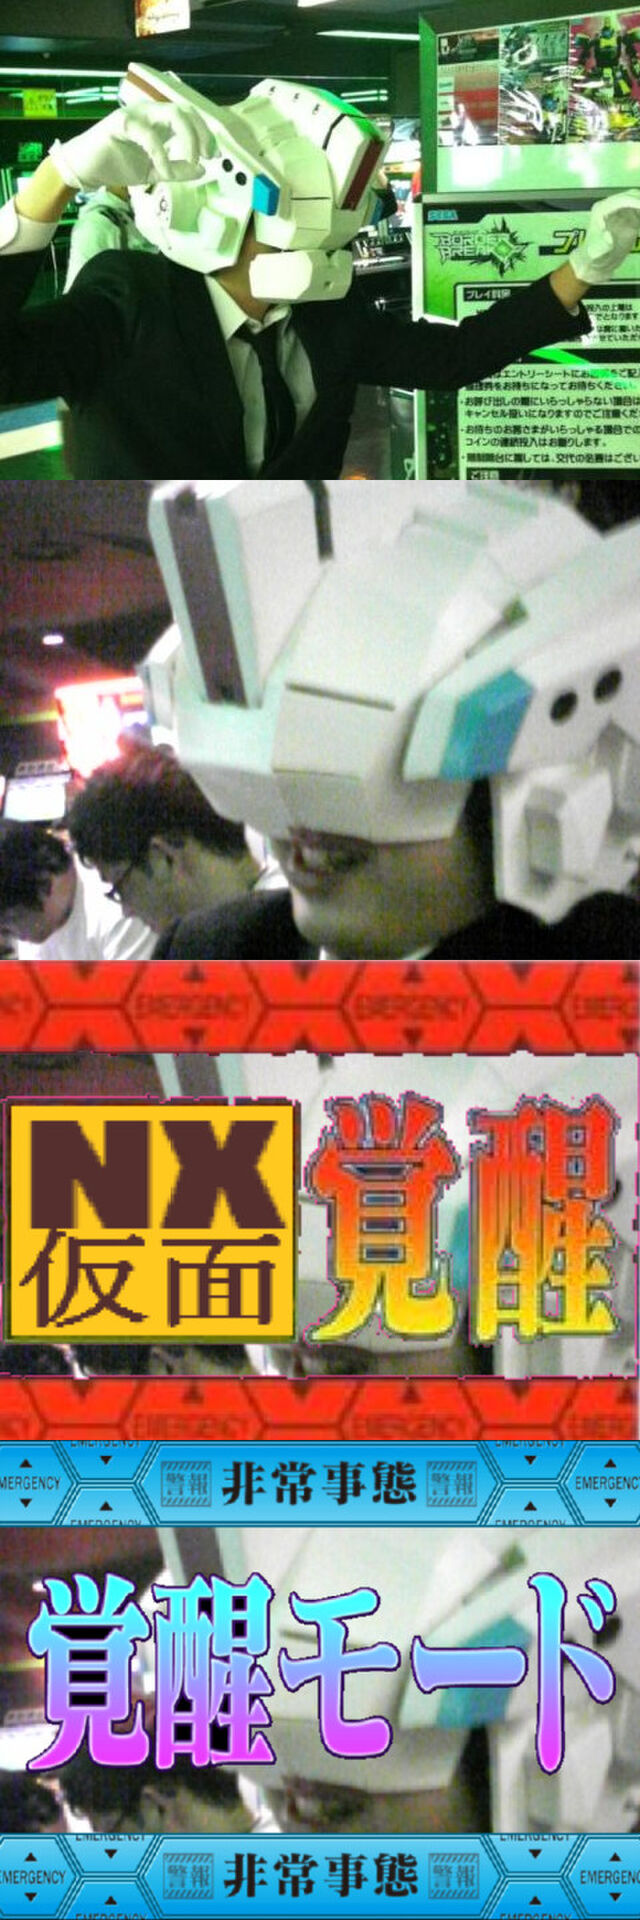 NX仮面、府中に現る!!!!!! - Togetter